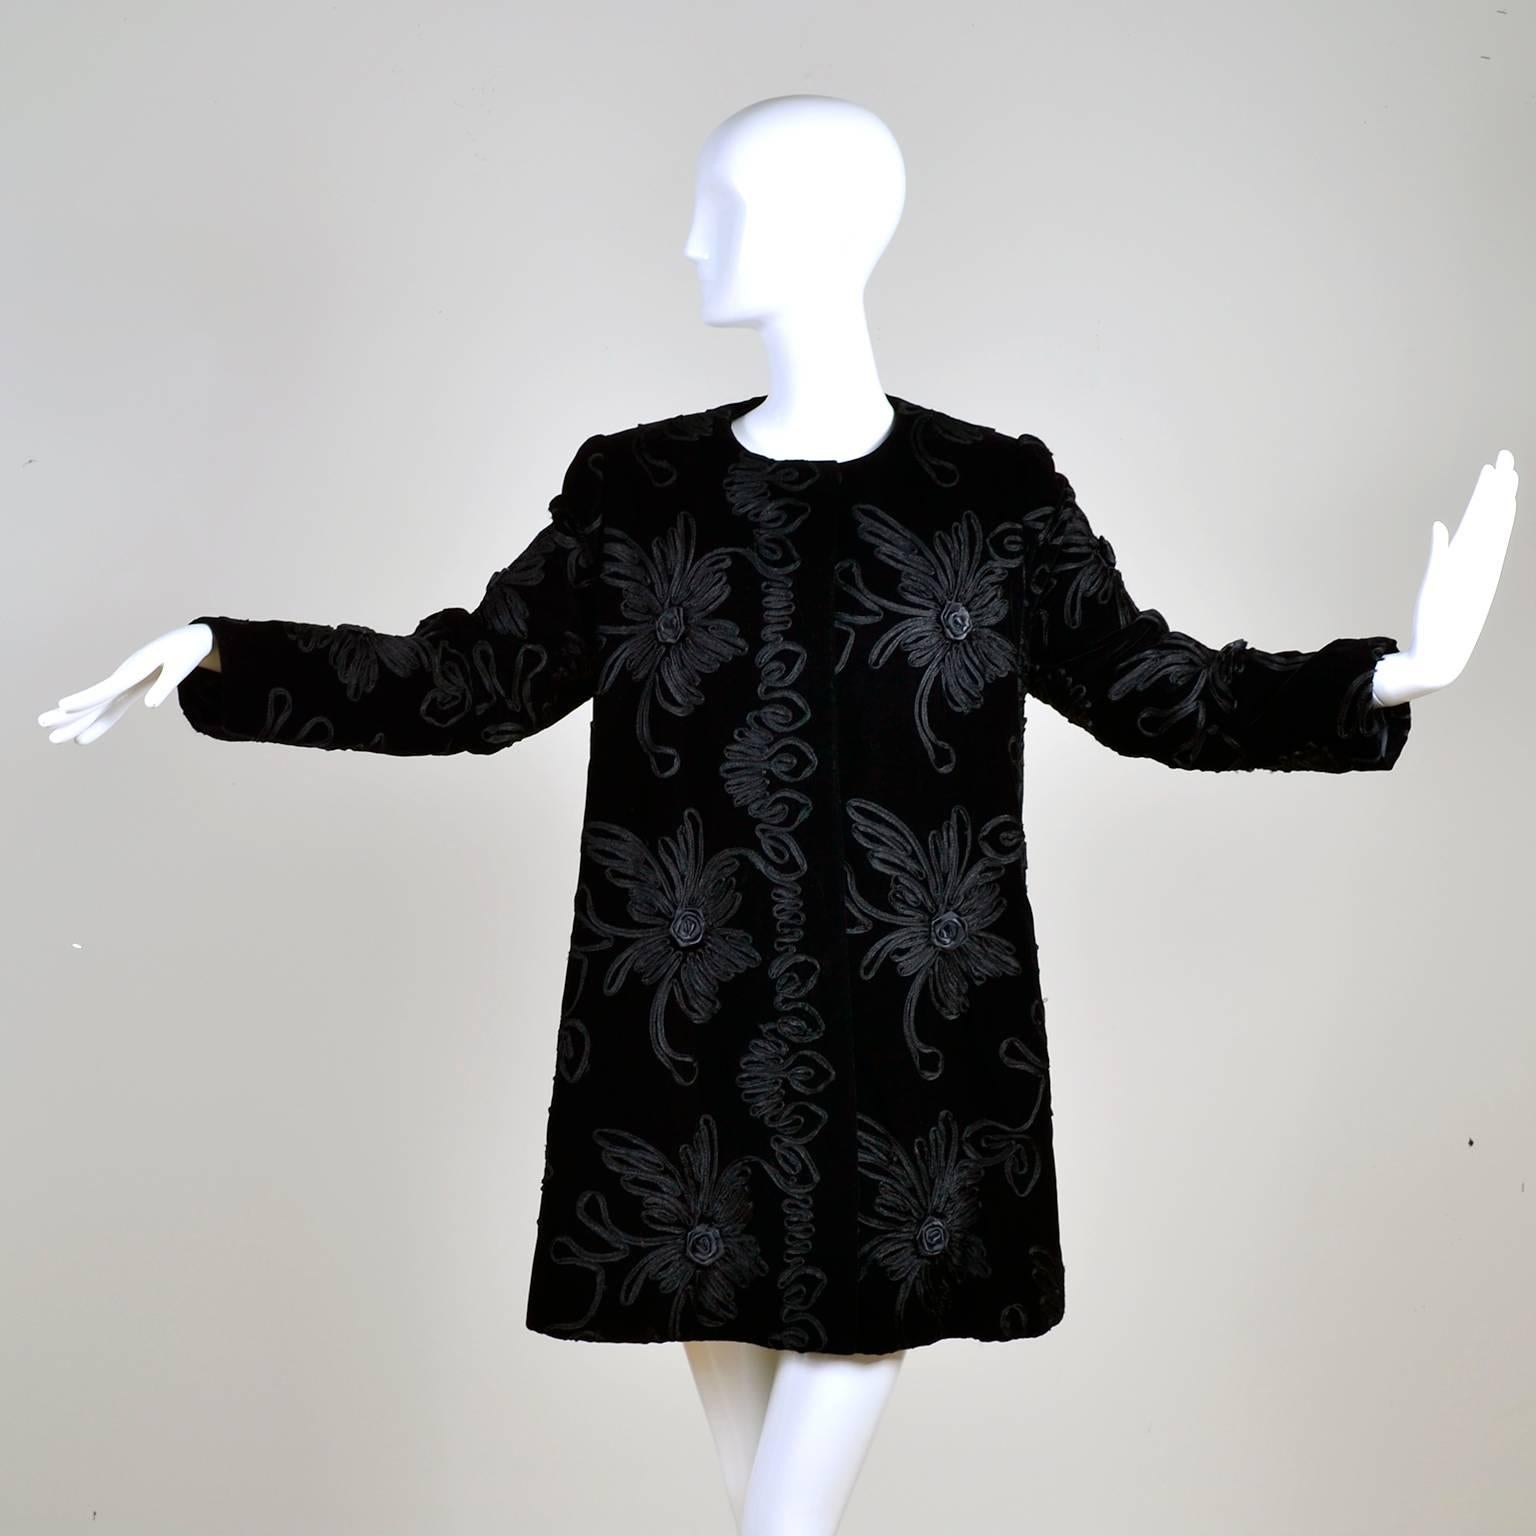 This Estevez couture black vintage evening coat is a really spectacular piece!  The coat is made of black velvet and it has incredible black soutache trim that forms flowers throughout!  The jacket has shoulder pads, a single snap closure at the